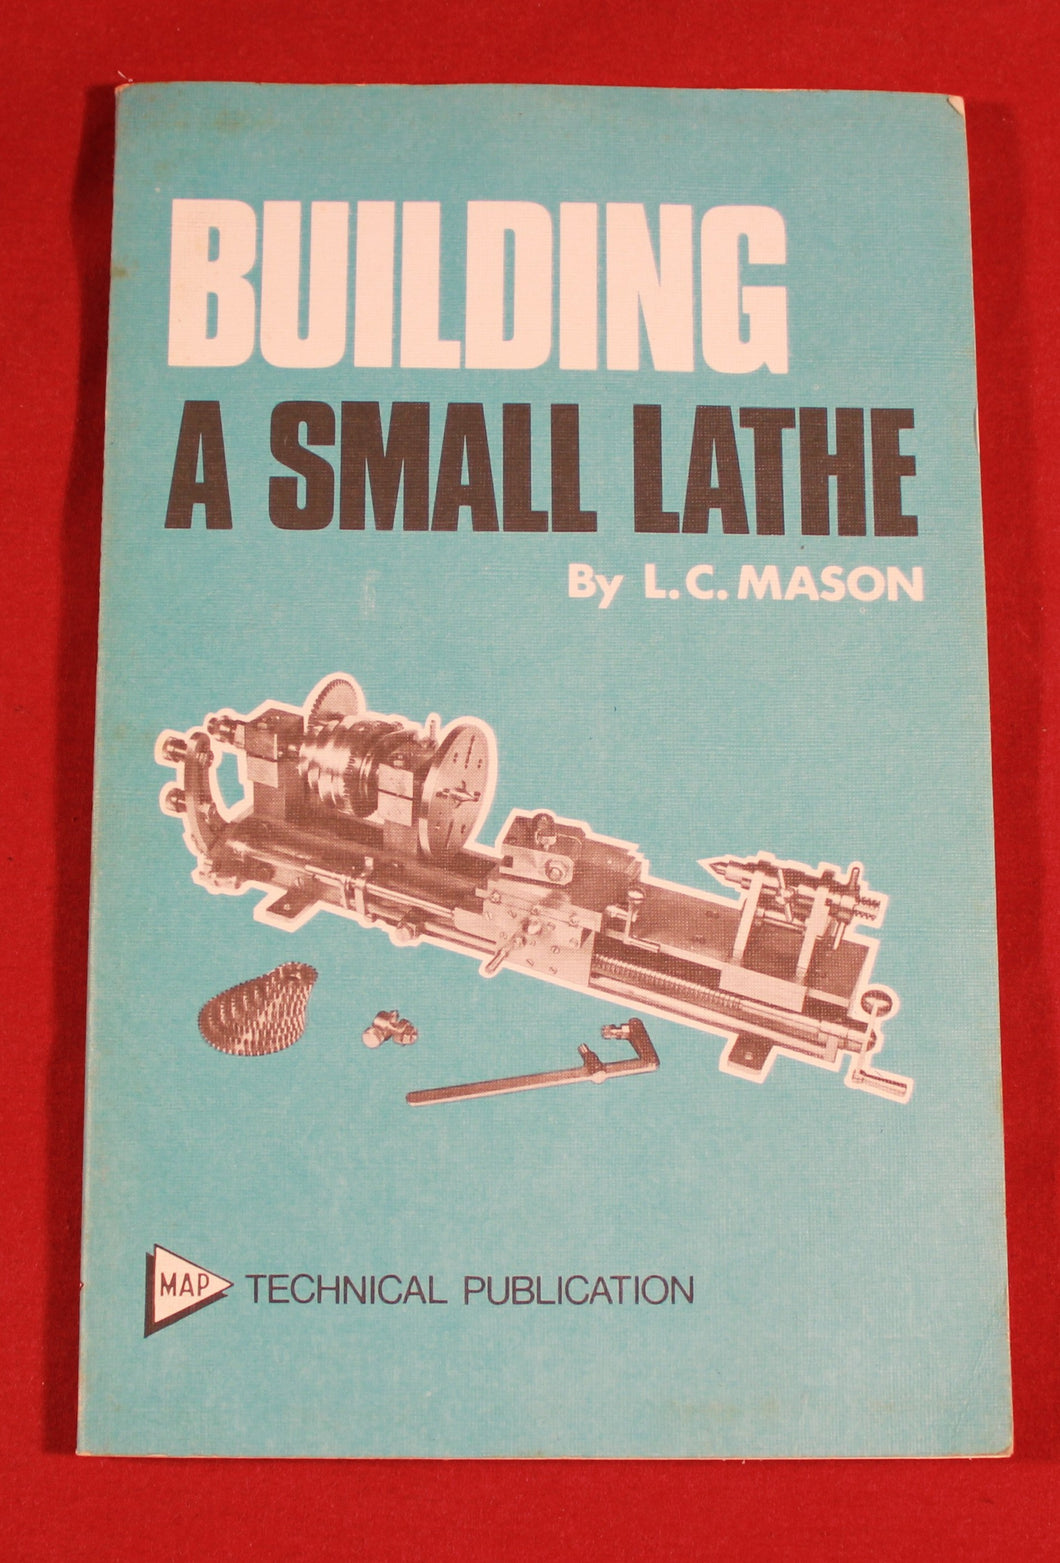 Building a Small Lathe by L.C. Mason Illustrated Machinists Guide - Paperback Book